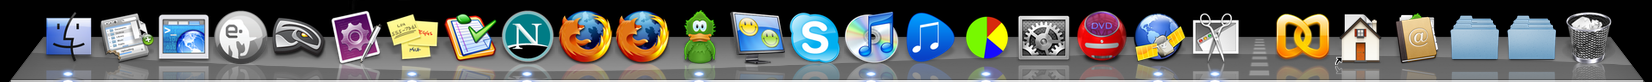 my dock, showing the applications I use regularly